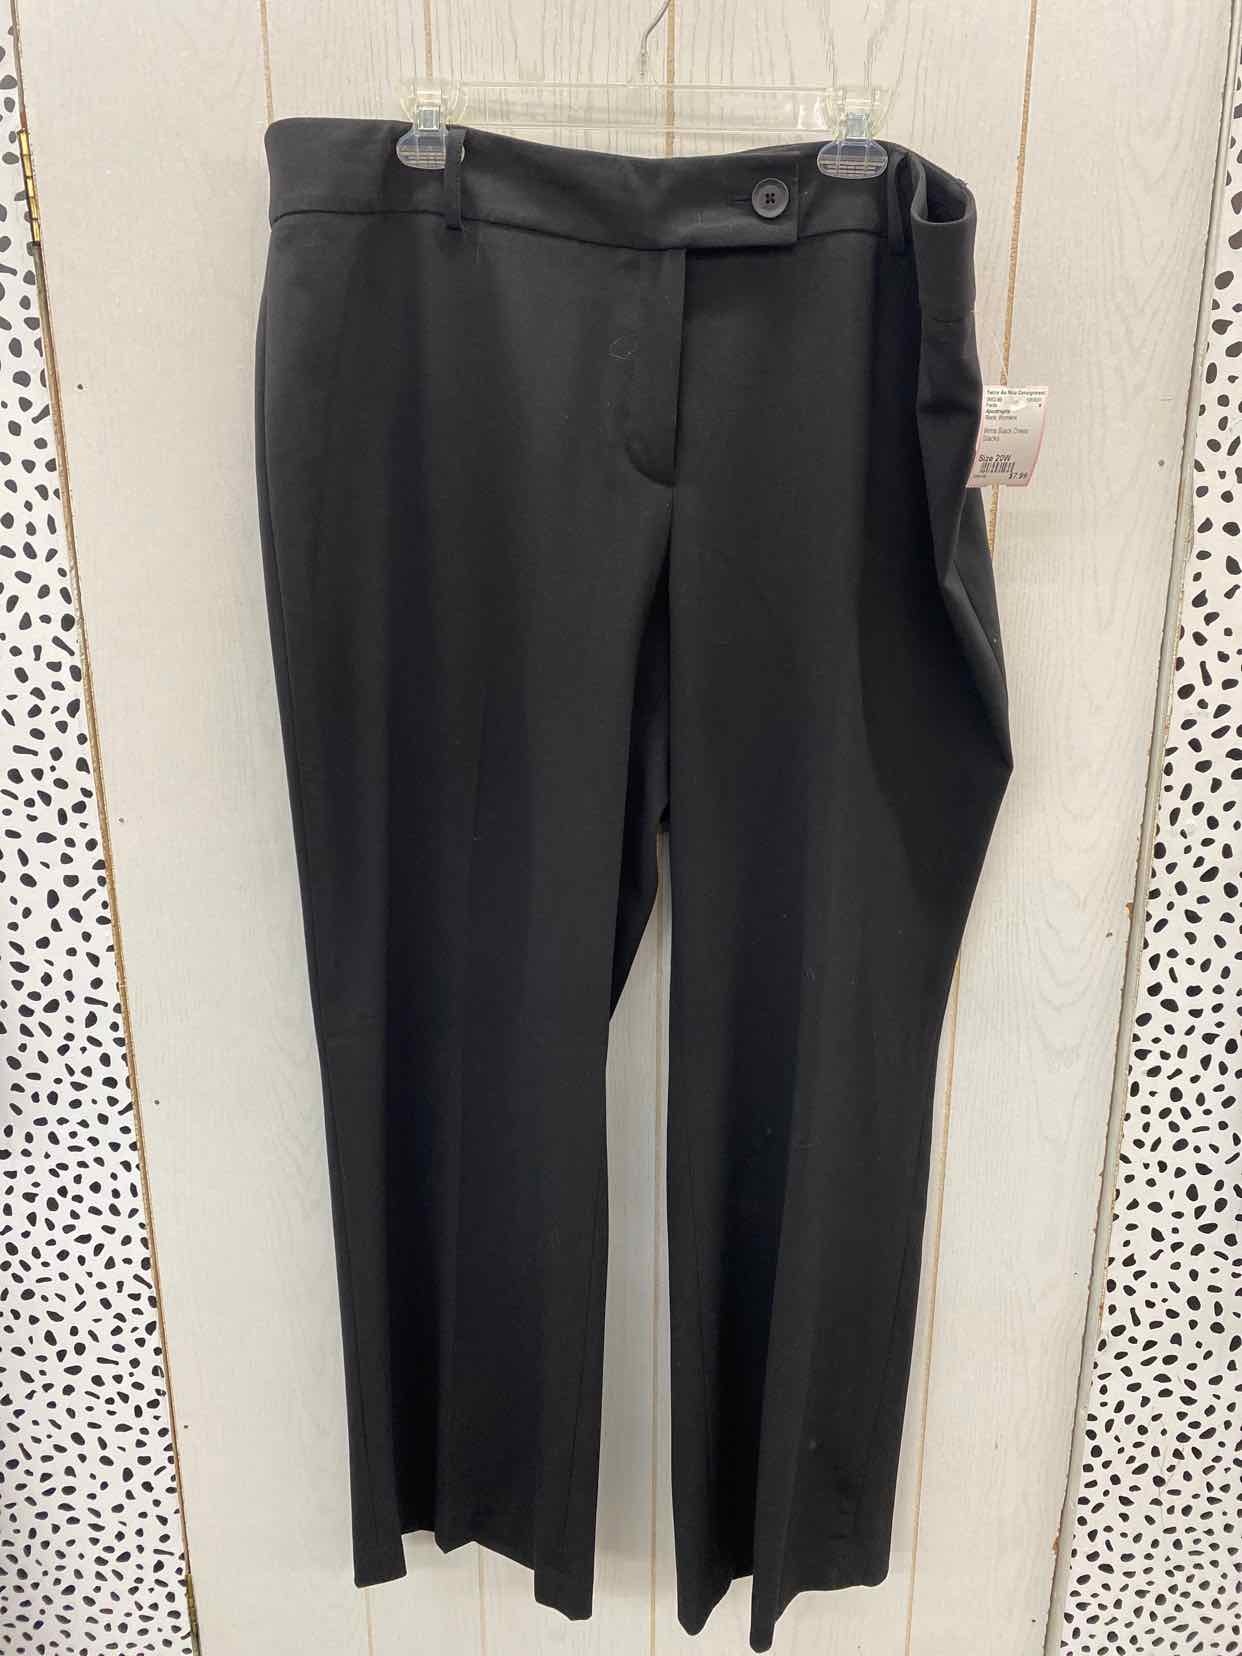 Apostrophe Black Womens Size 20W Pants – Twice As Nice Consignments